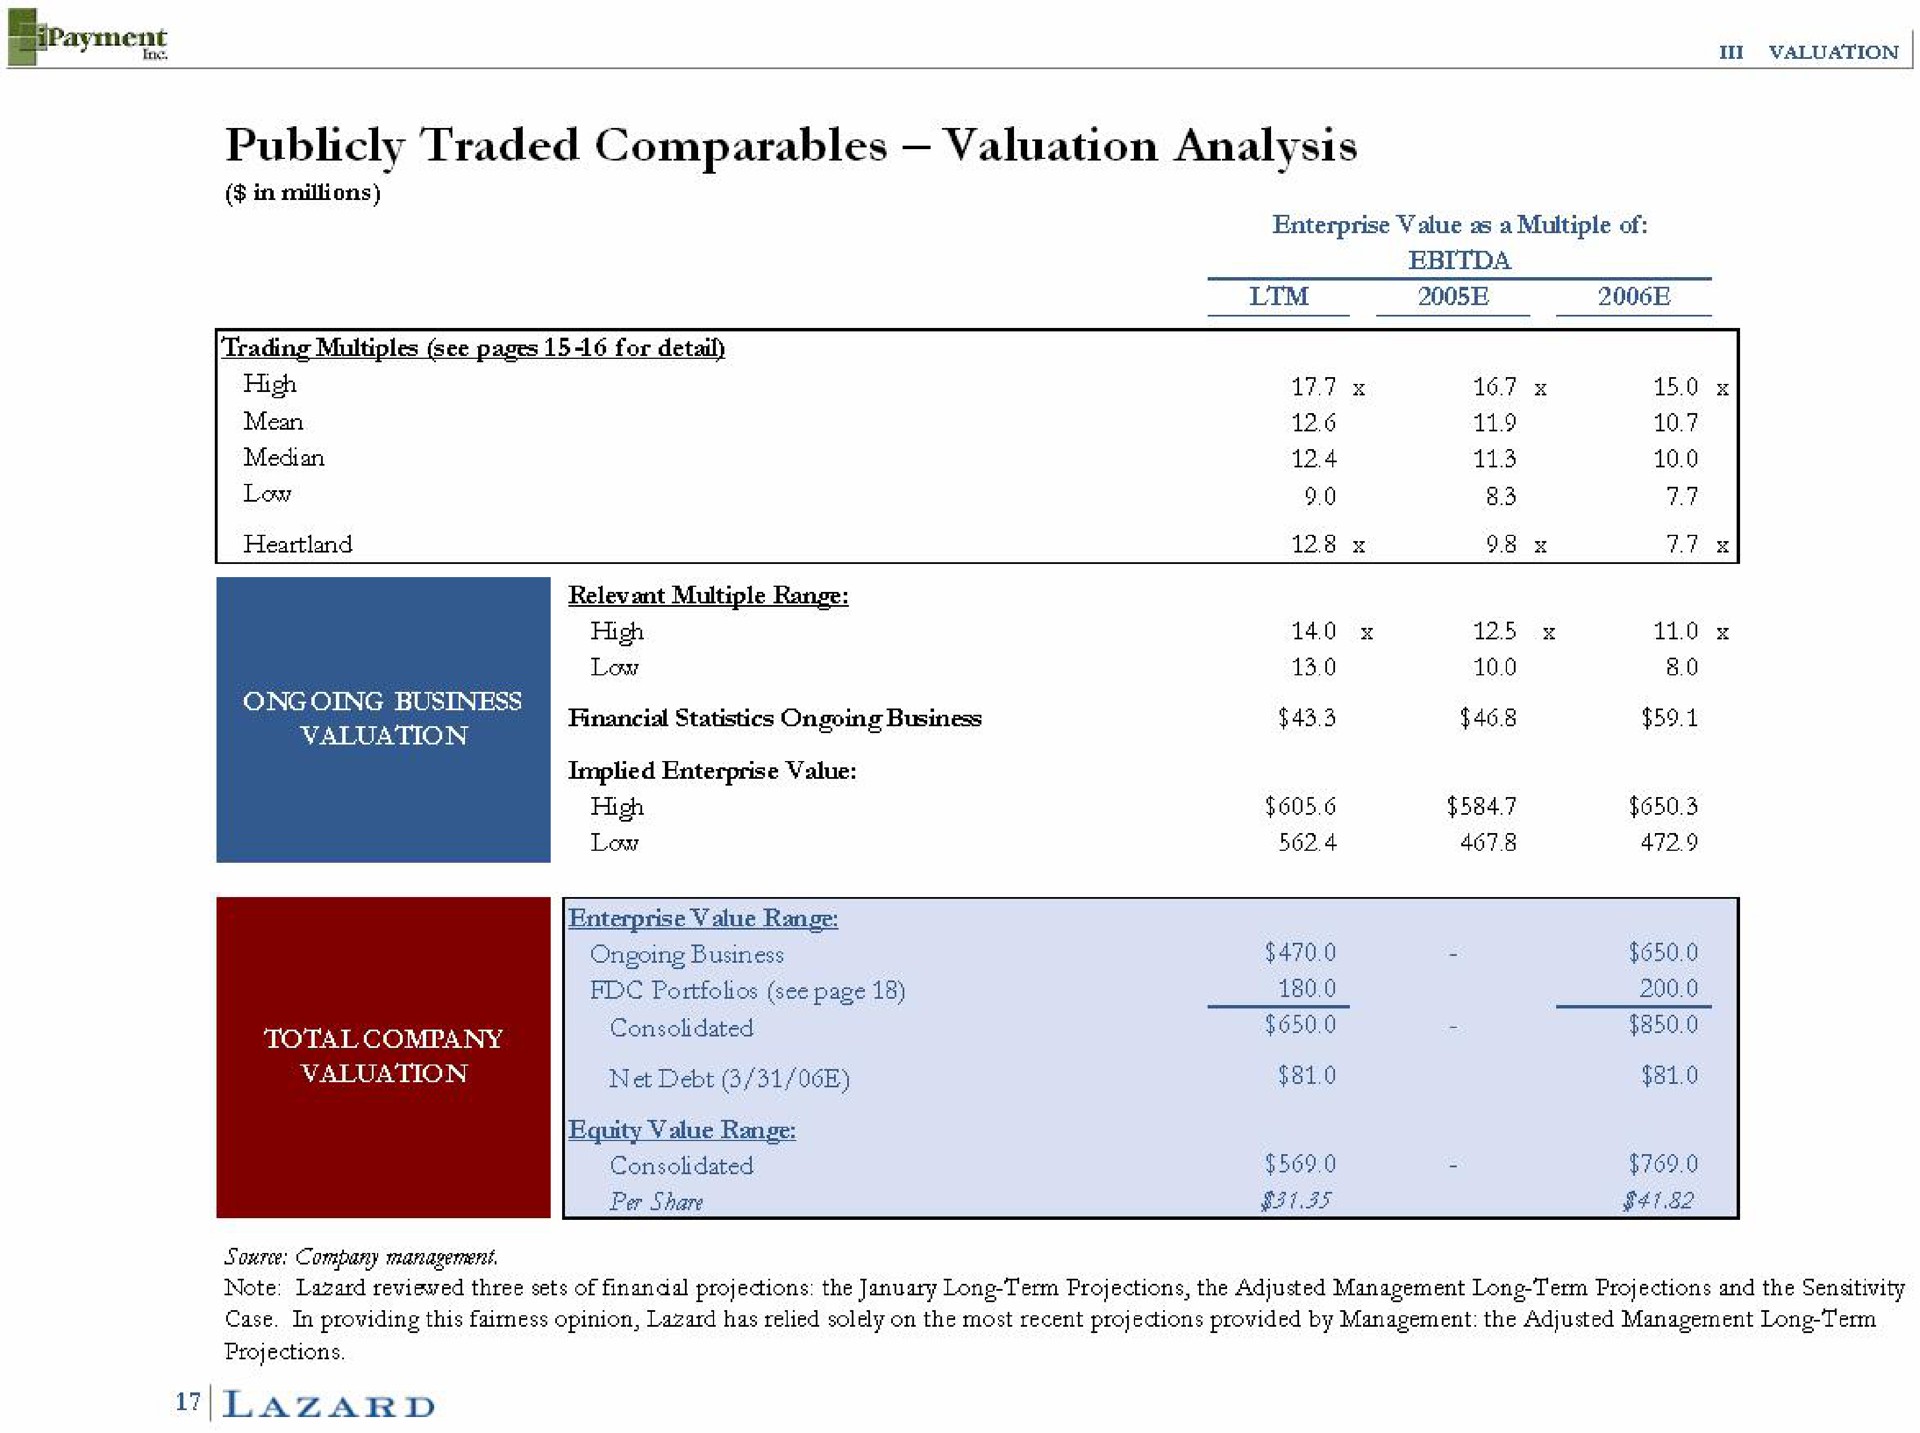 publicly traded valuation analysis | Lazard